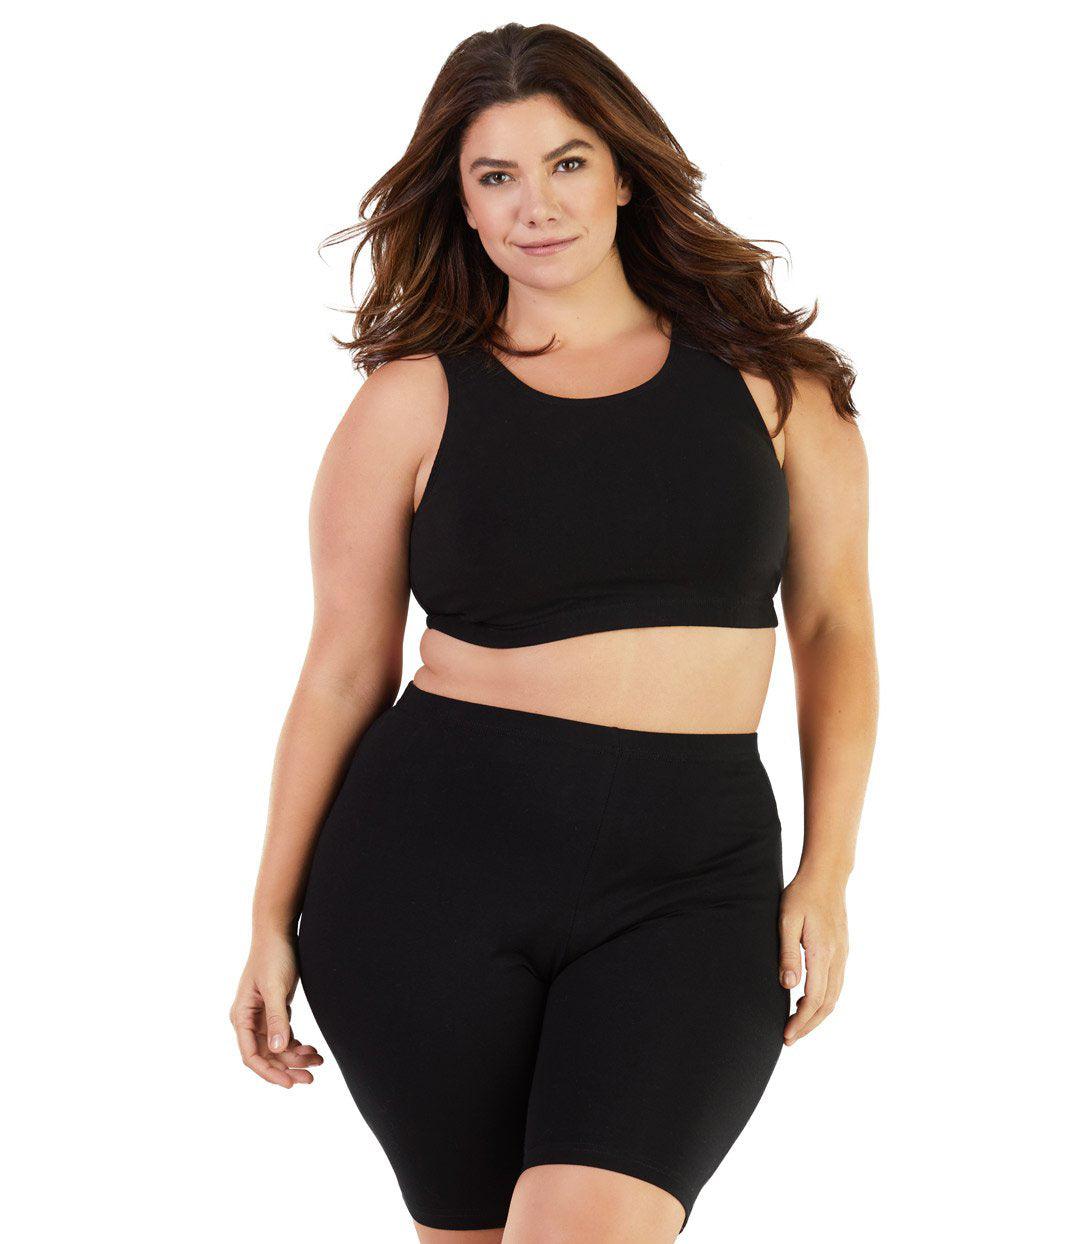 Plus size woman, facing front, wearing JunoActive plus size Stretch Naturals Crossback Bra Top in Black. The woman is wearing a pair of Black JunoActive fitted boxers.